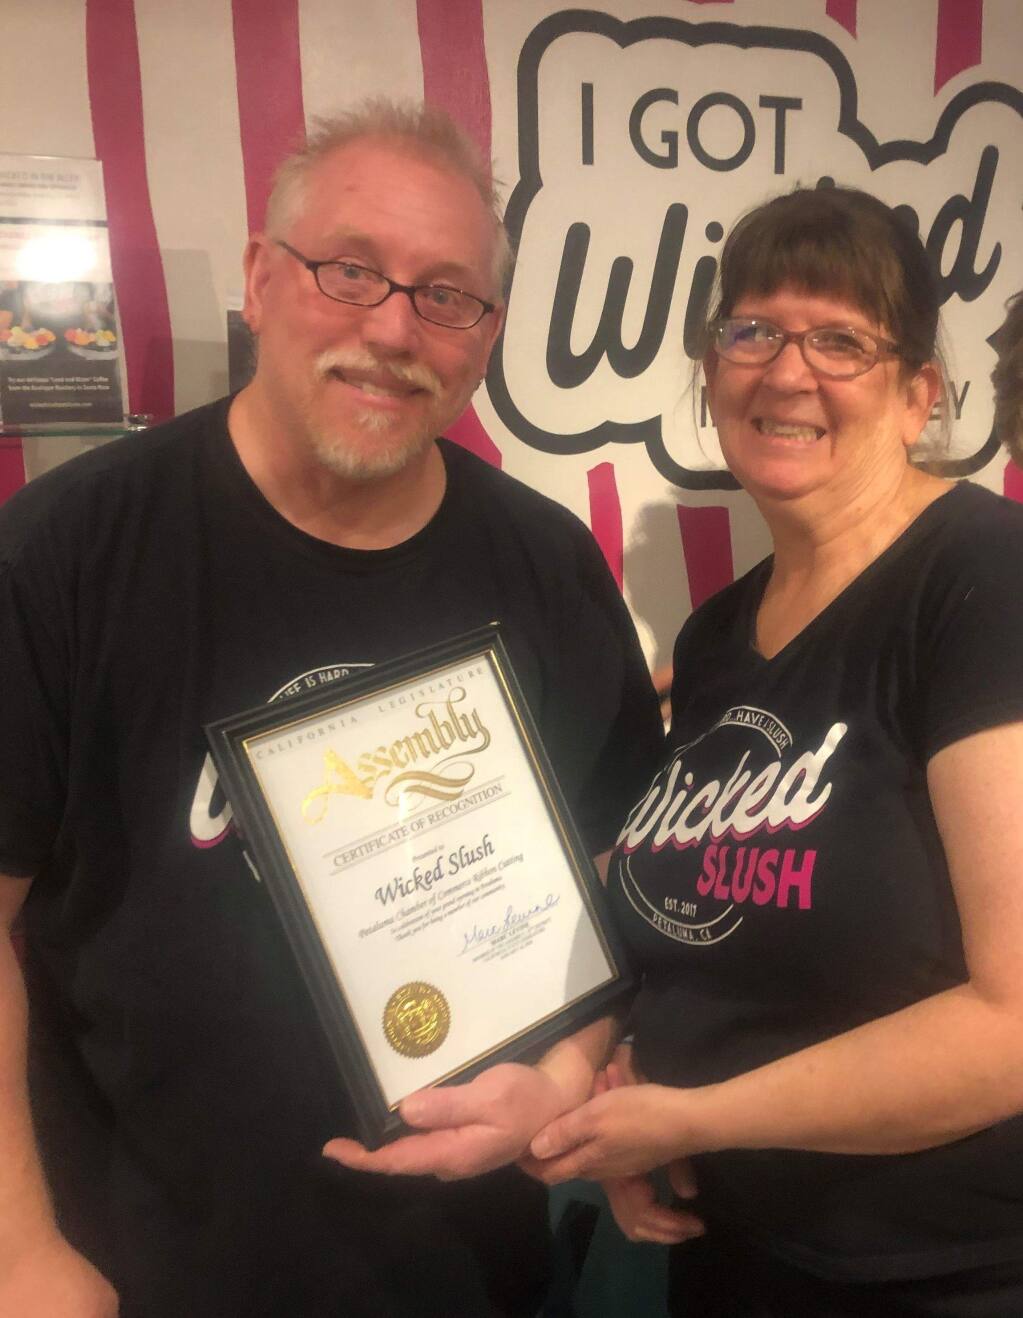 Dave and Juliet Pokorny, of Wicked Slush, with Certificate of Recognition from the California State Assembly.